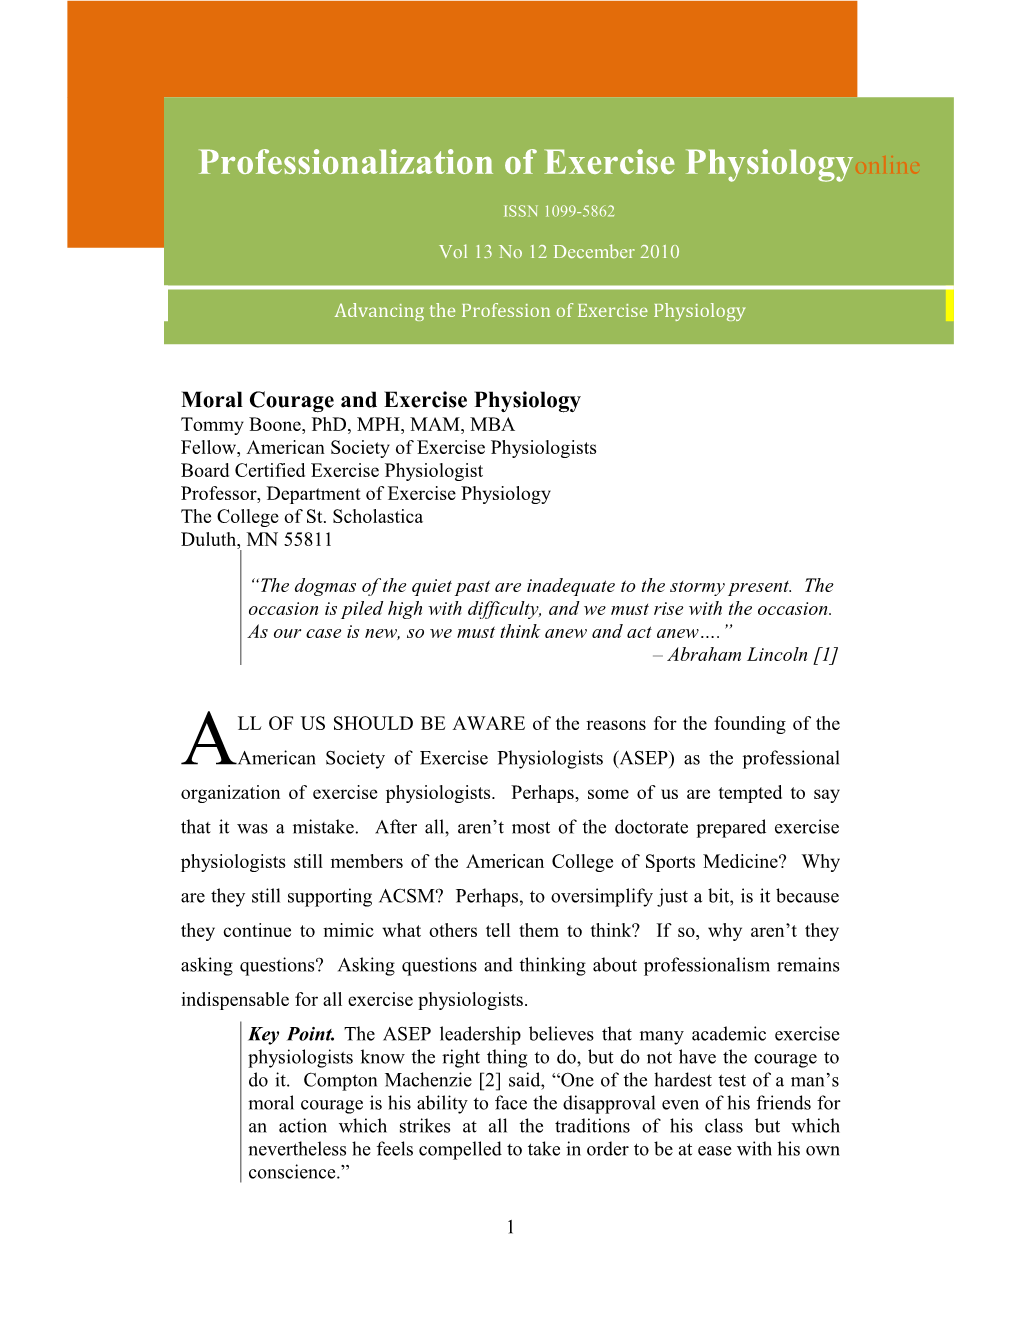 The ASEP Obligation to the Future of Exercise Physiology